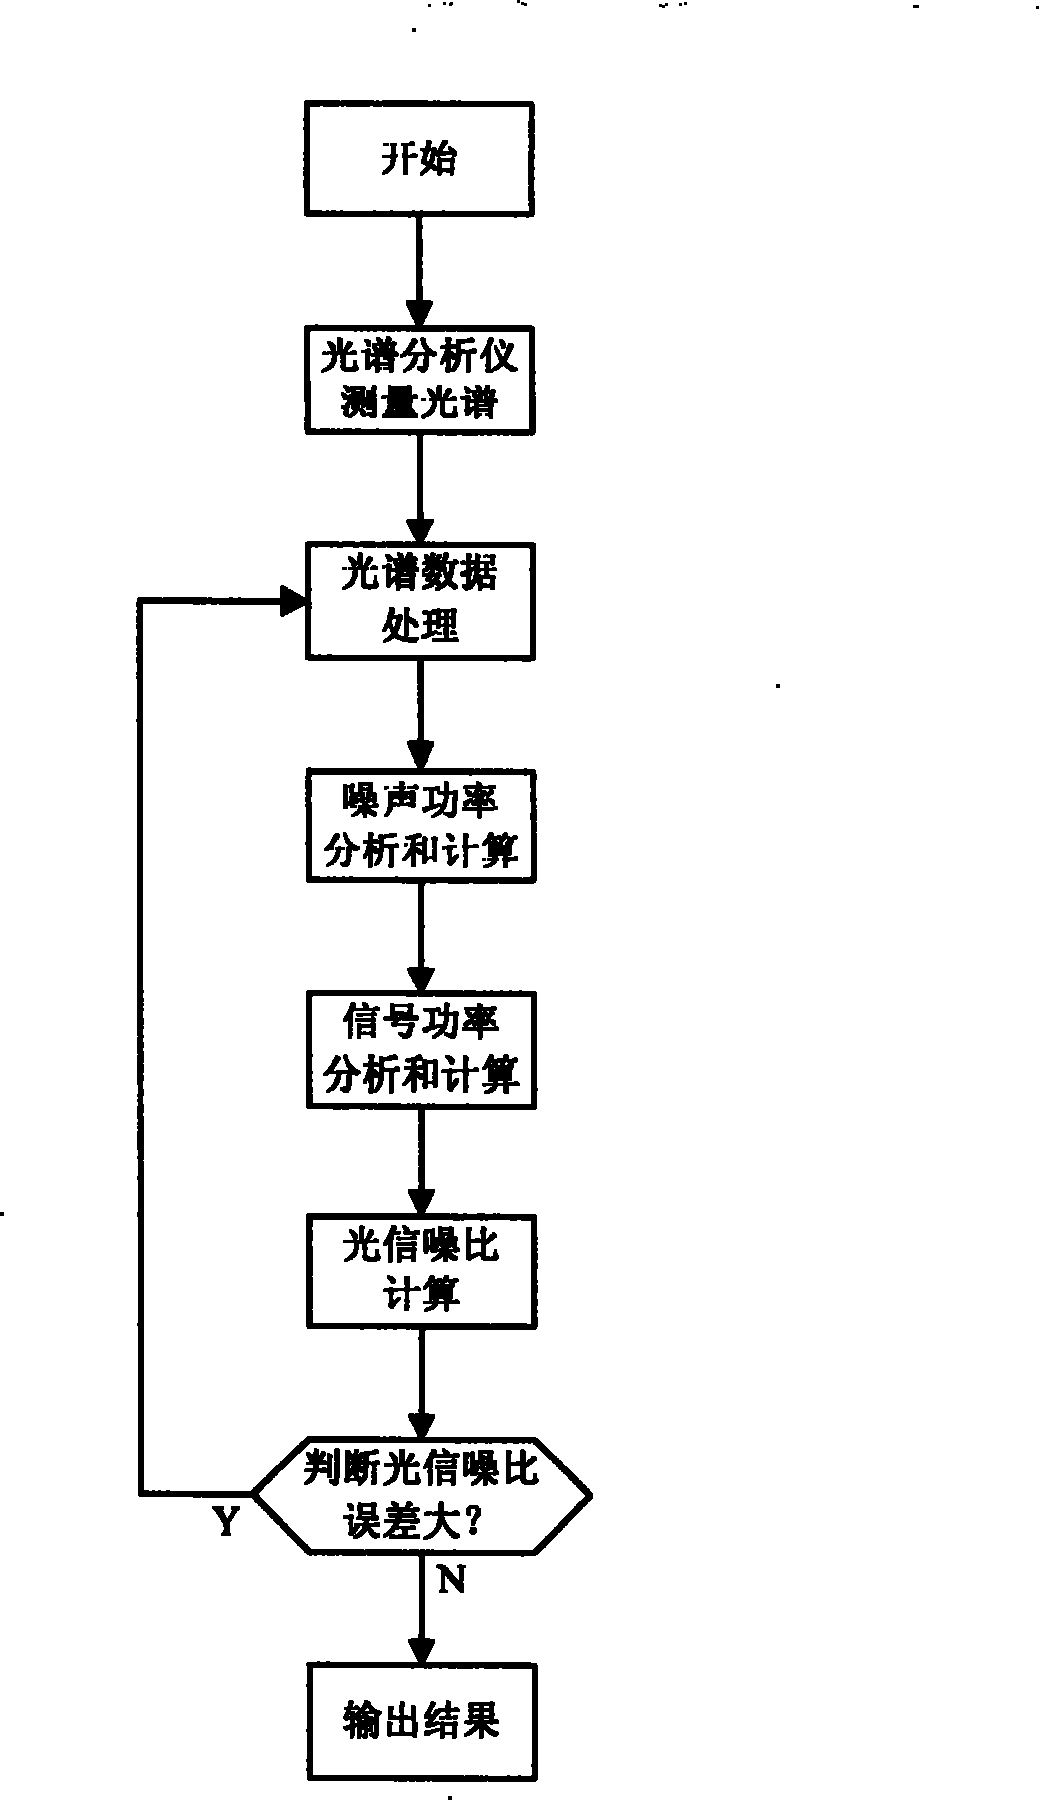 Method for testing signal-to-noise ratio of wavelength division multiplexing system